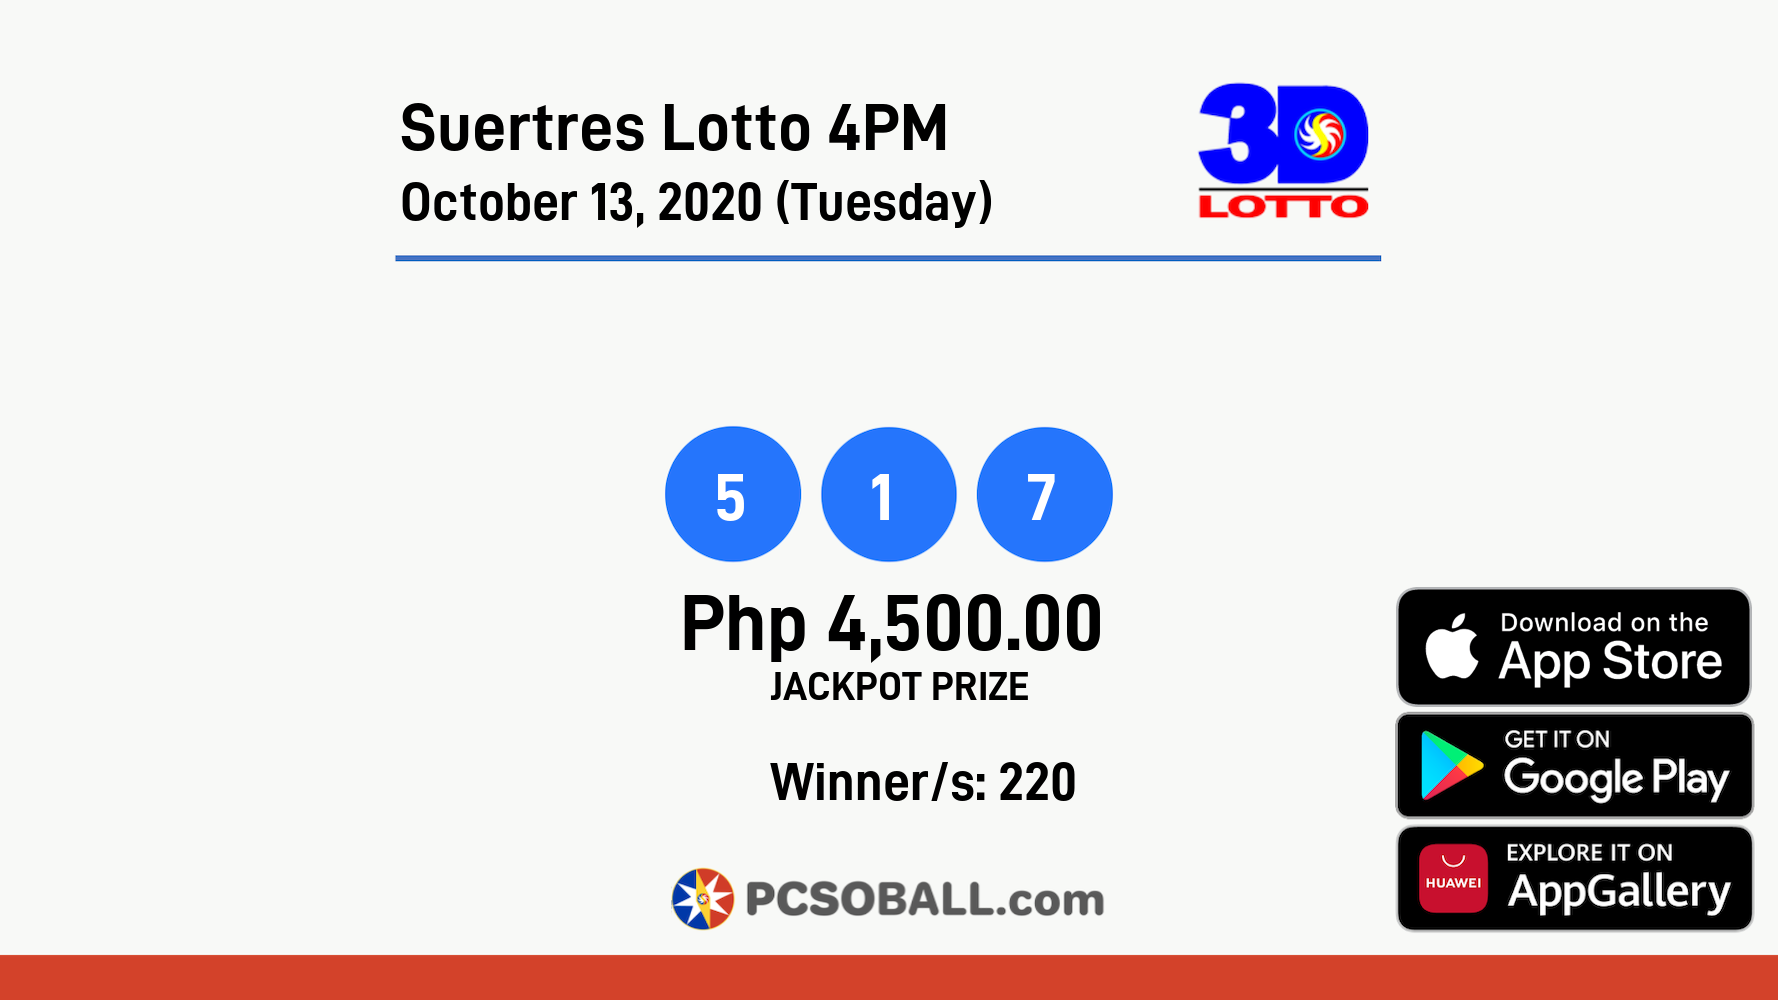 Suertres Lotto 4PM October 13, 2020 (Tuesday) Result